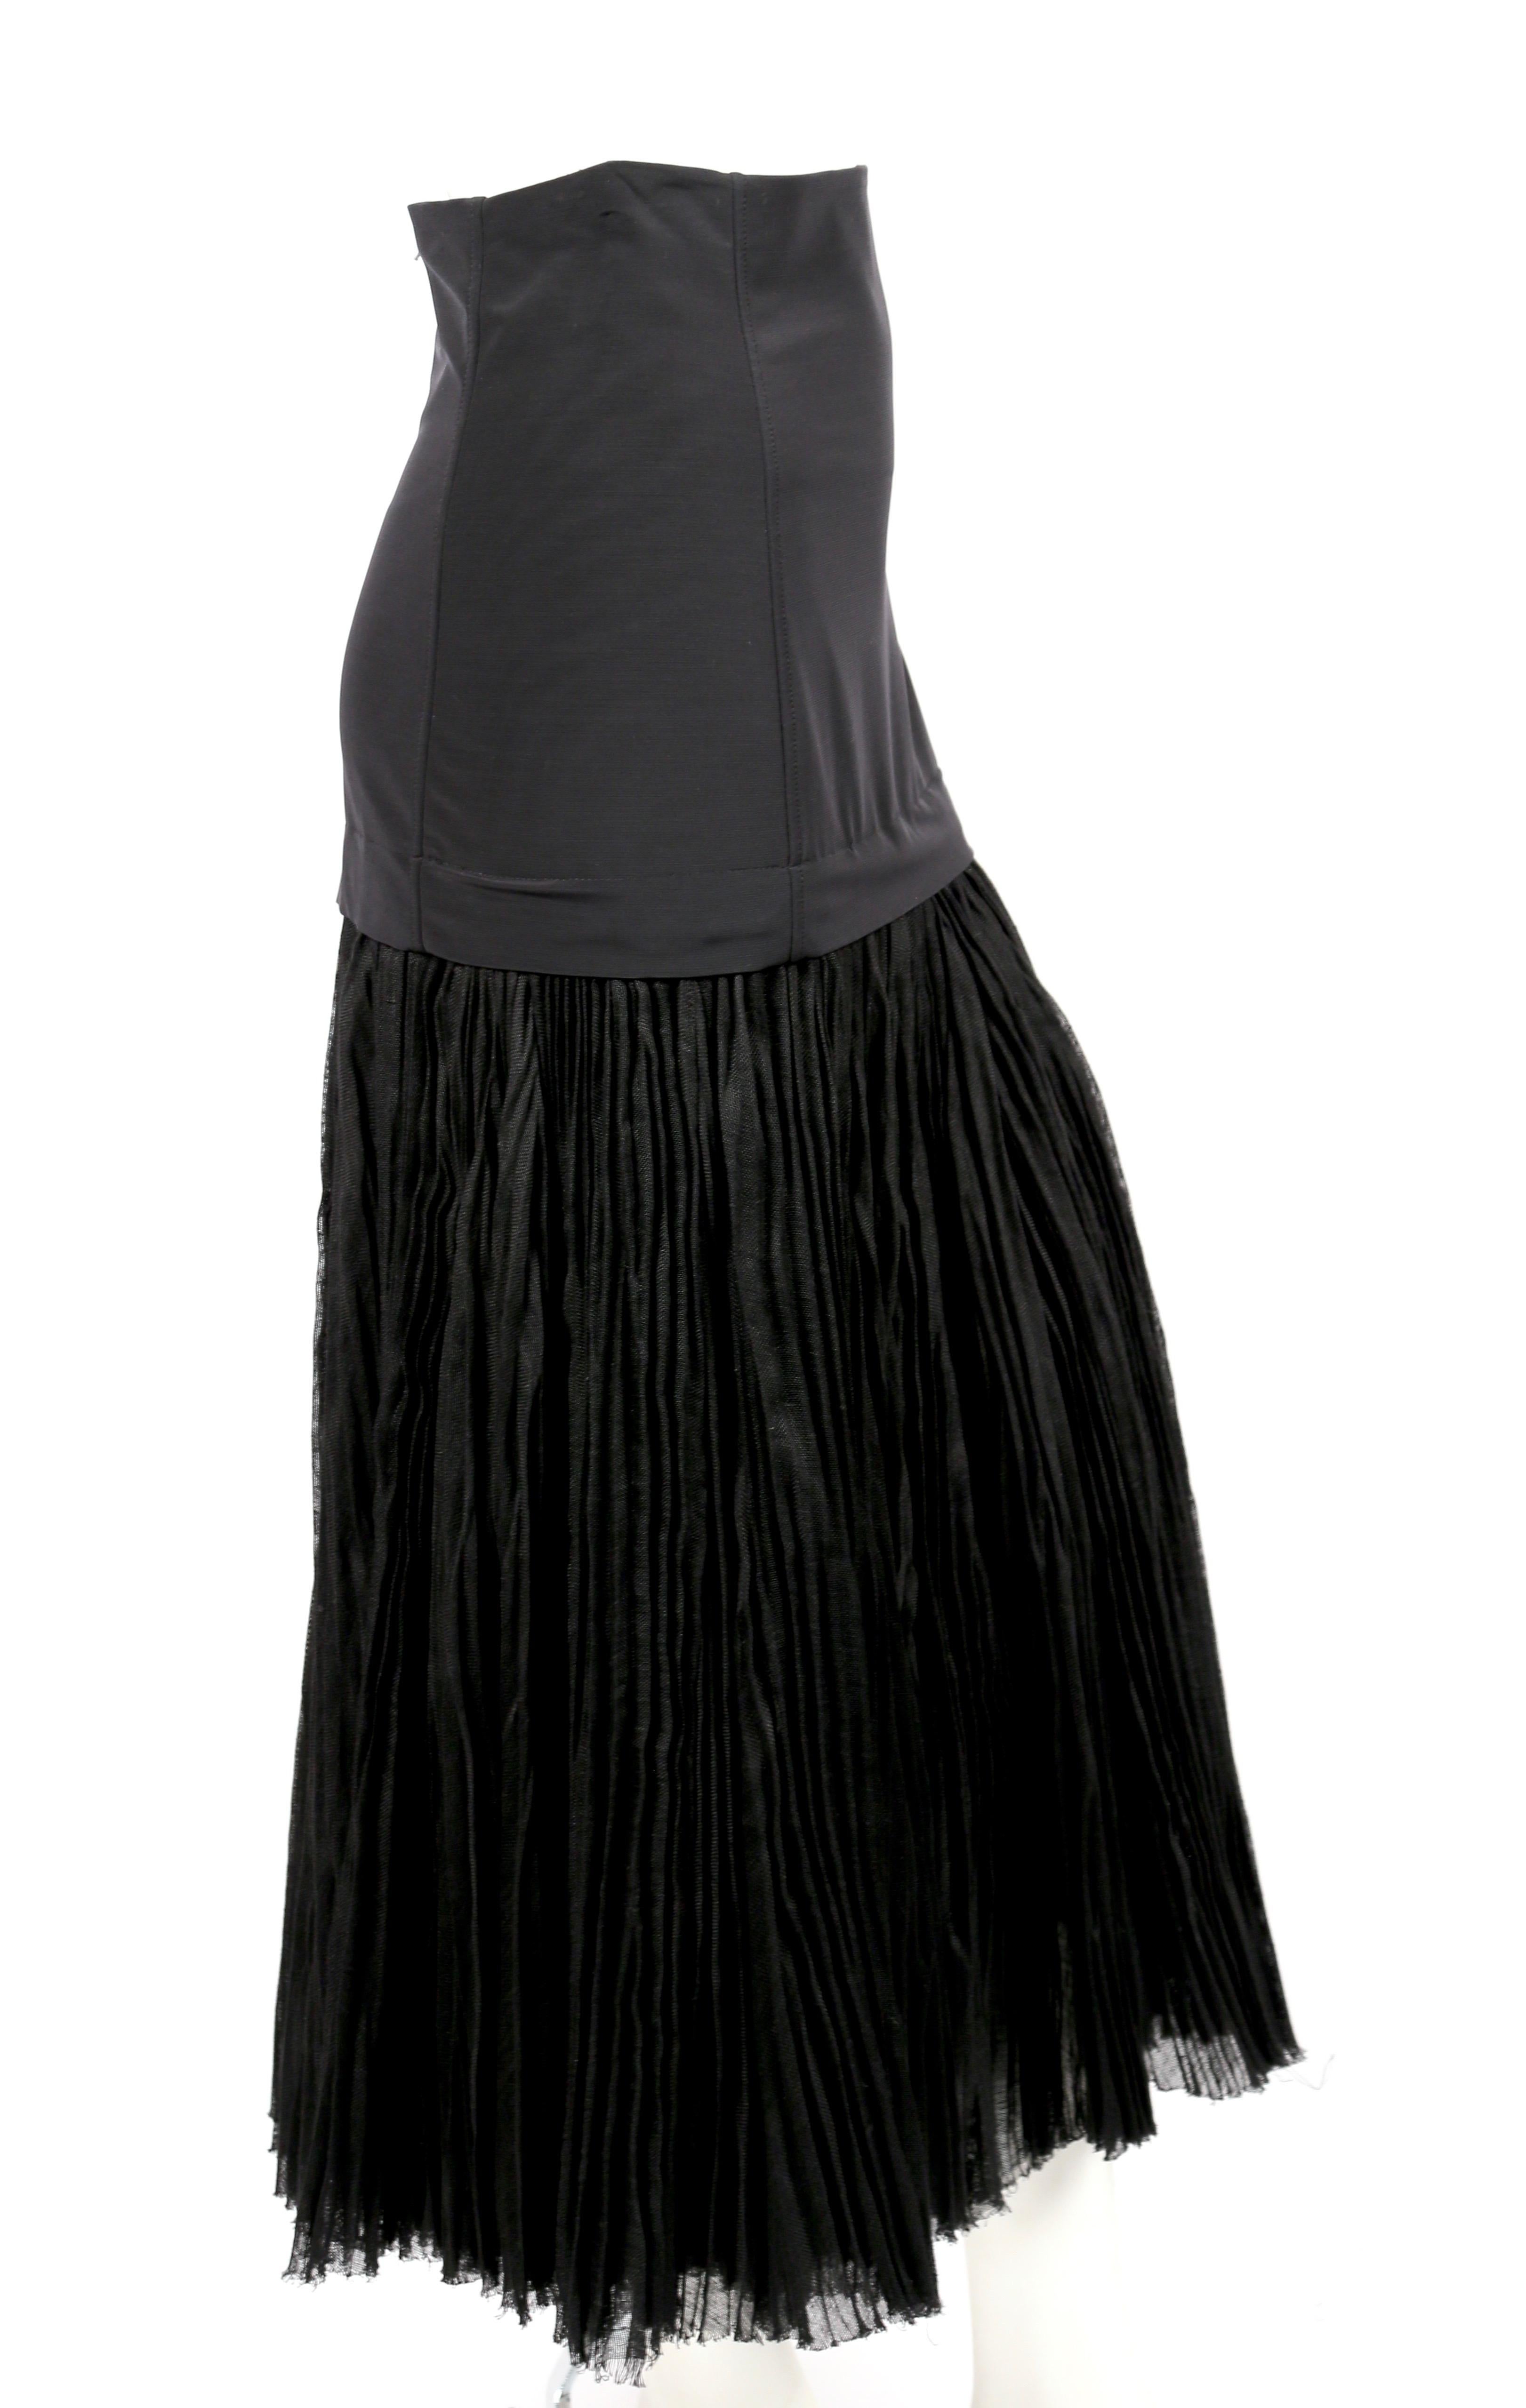 Jet-black flared skirt designed by Phoebe Philo for Celine exactly as seen on the runway for spring of 2014. Very flattering and comfortable fit.  Labeled a French size 38. Approximate measurements (un-stretched): 27